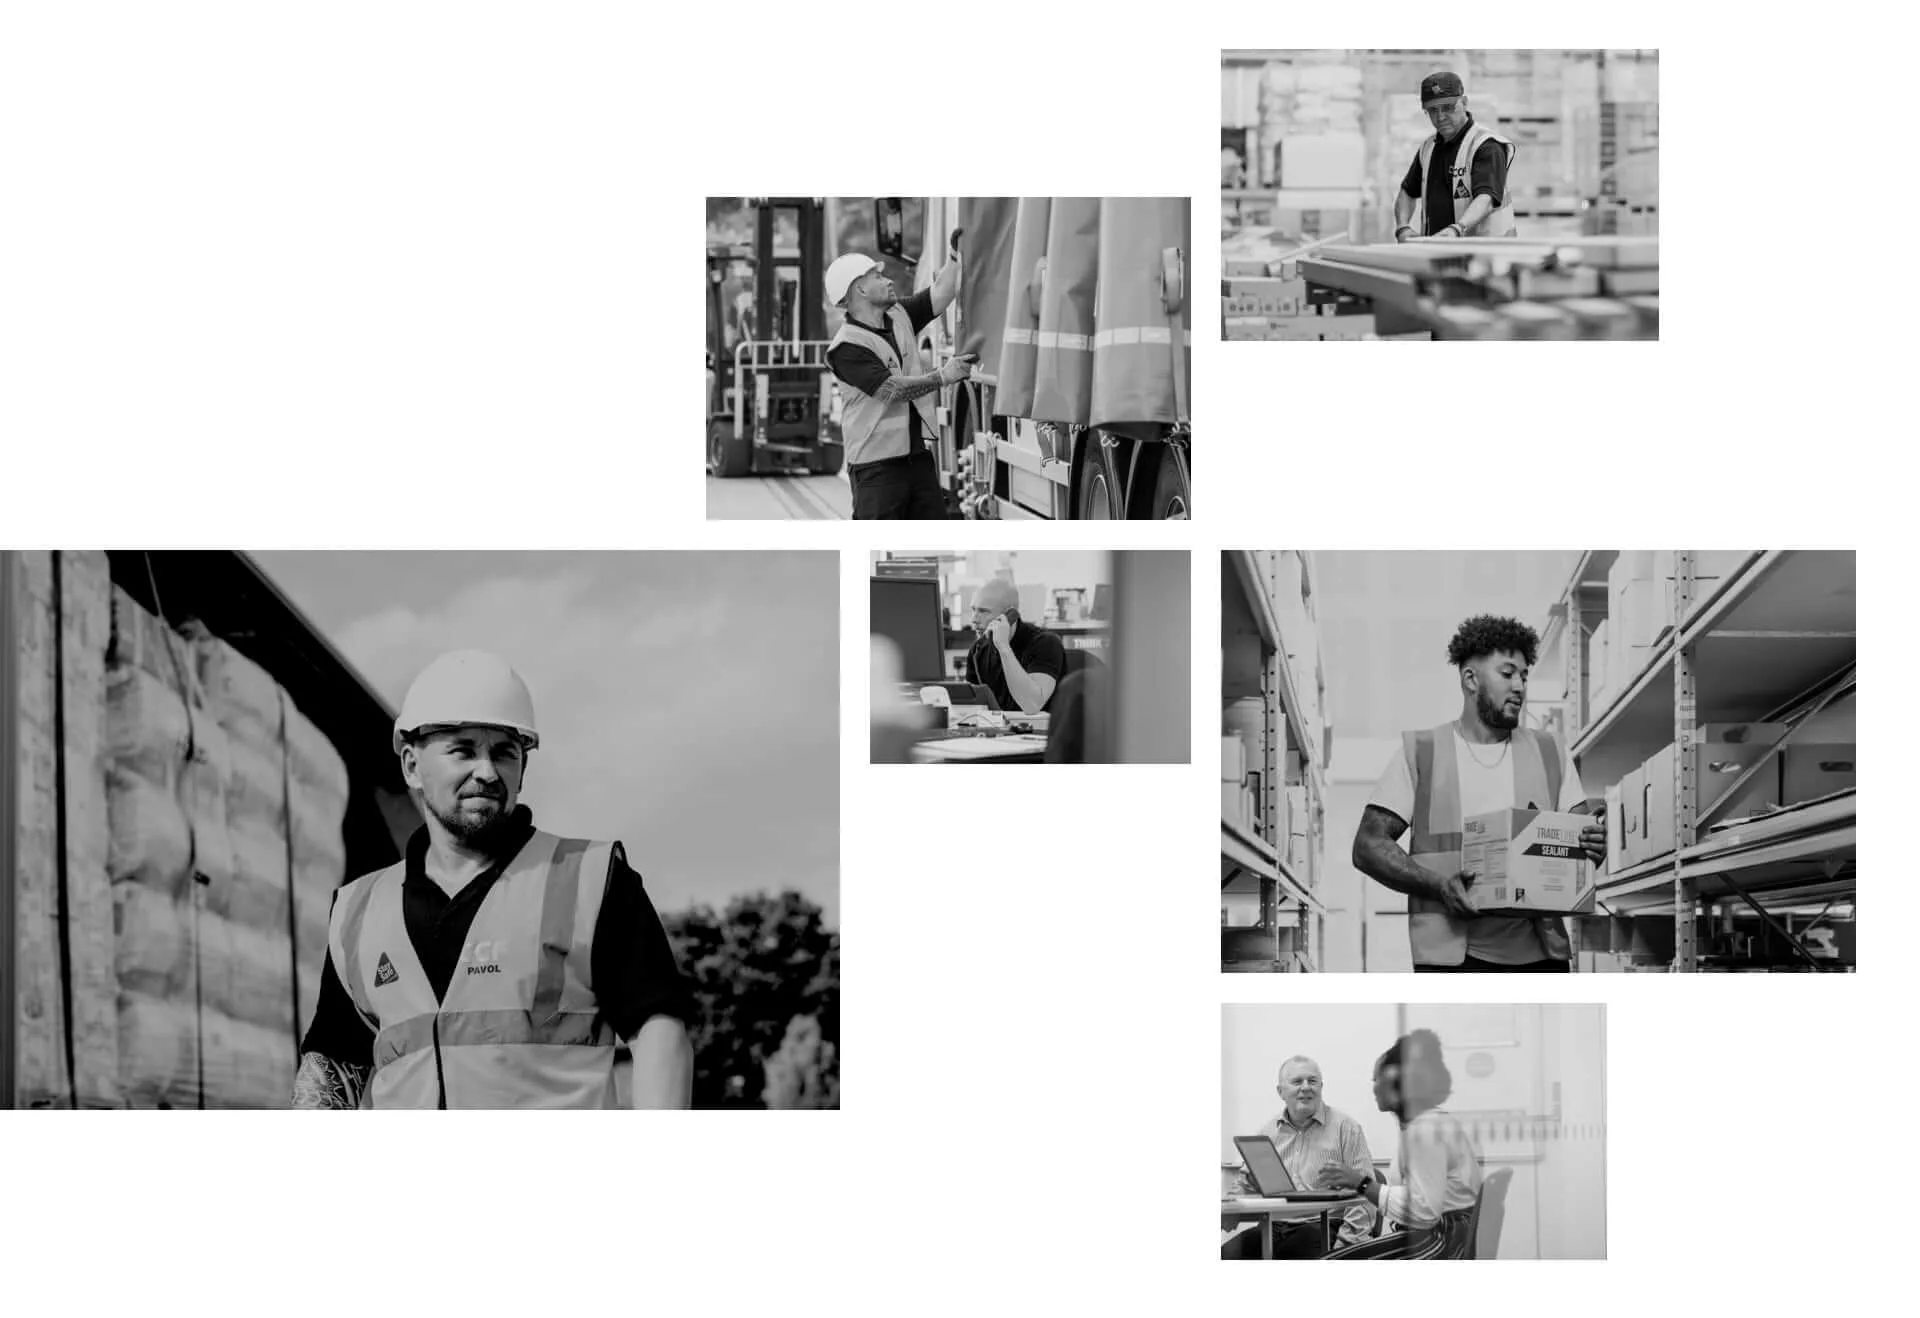 A montage of images in black and white showing staff members who work at CCF